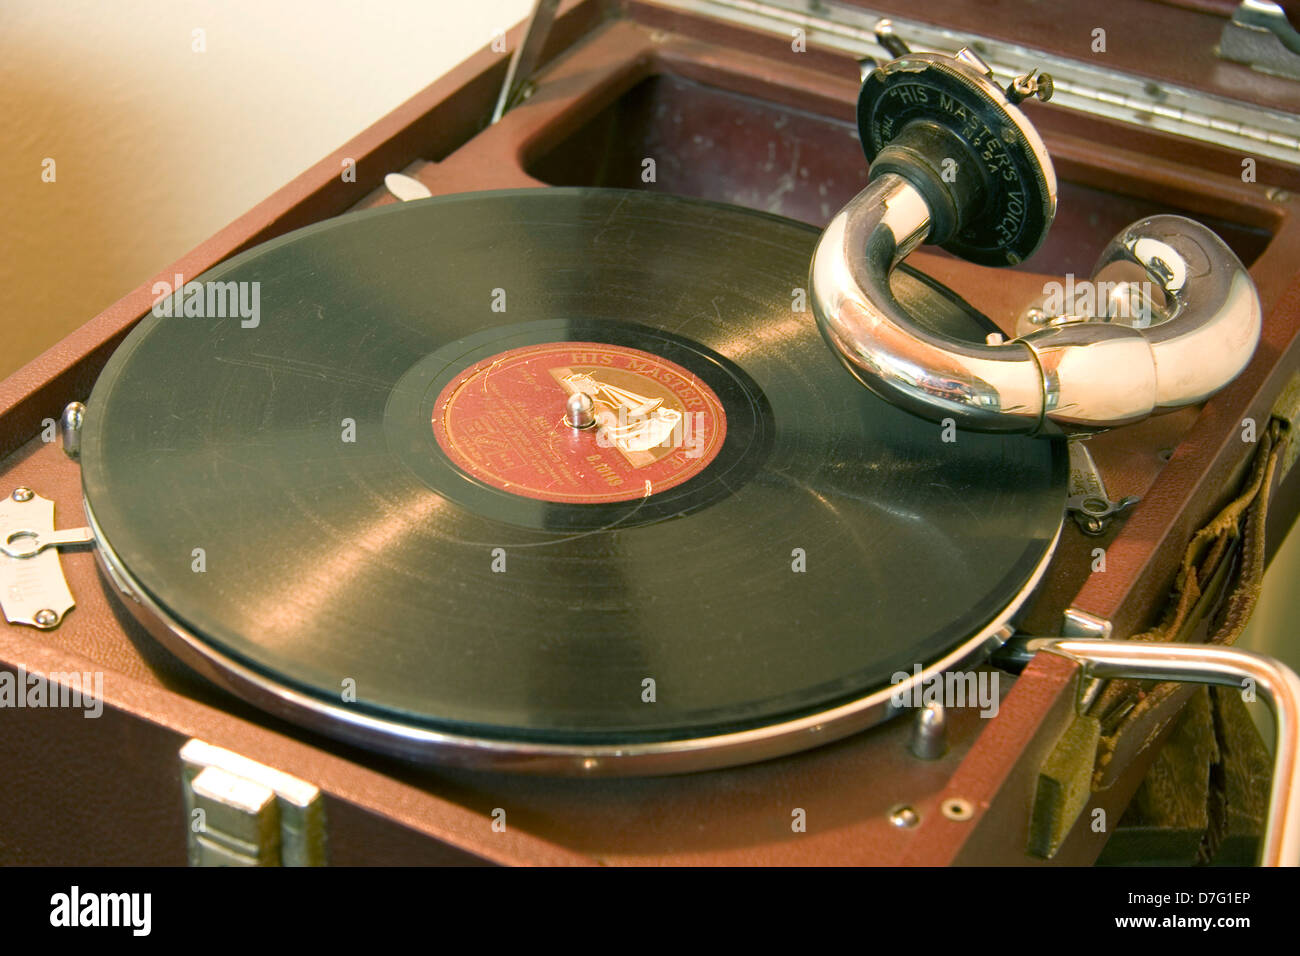 His Masters Voice gramophone model 5A And A Record Stock Photo